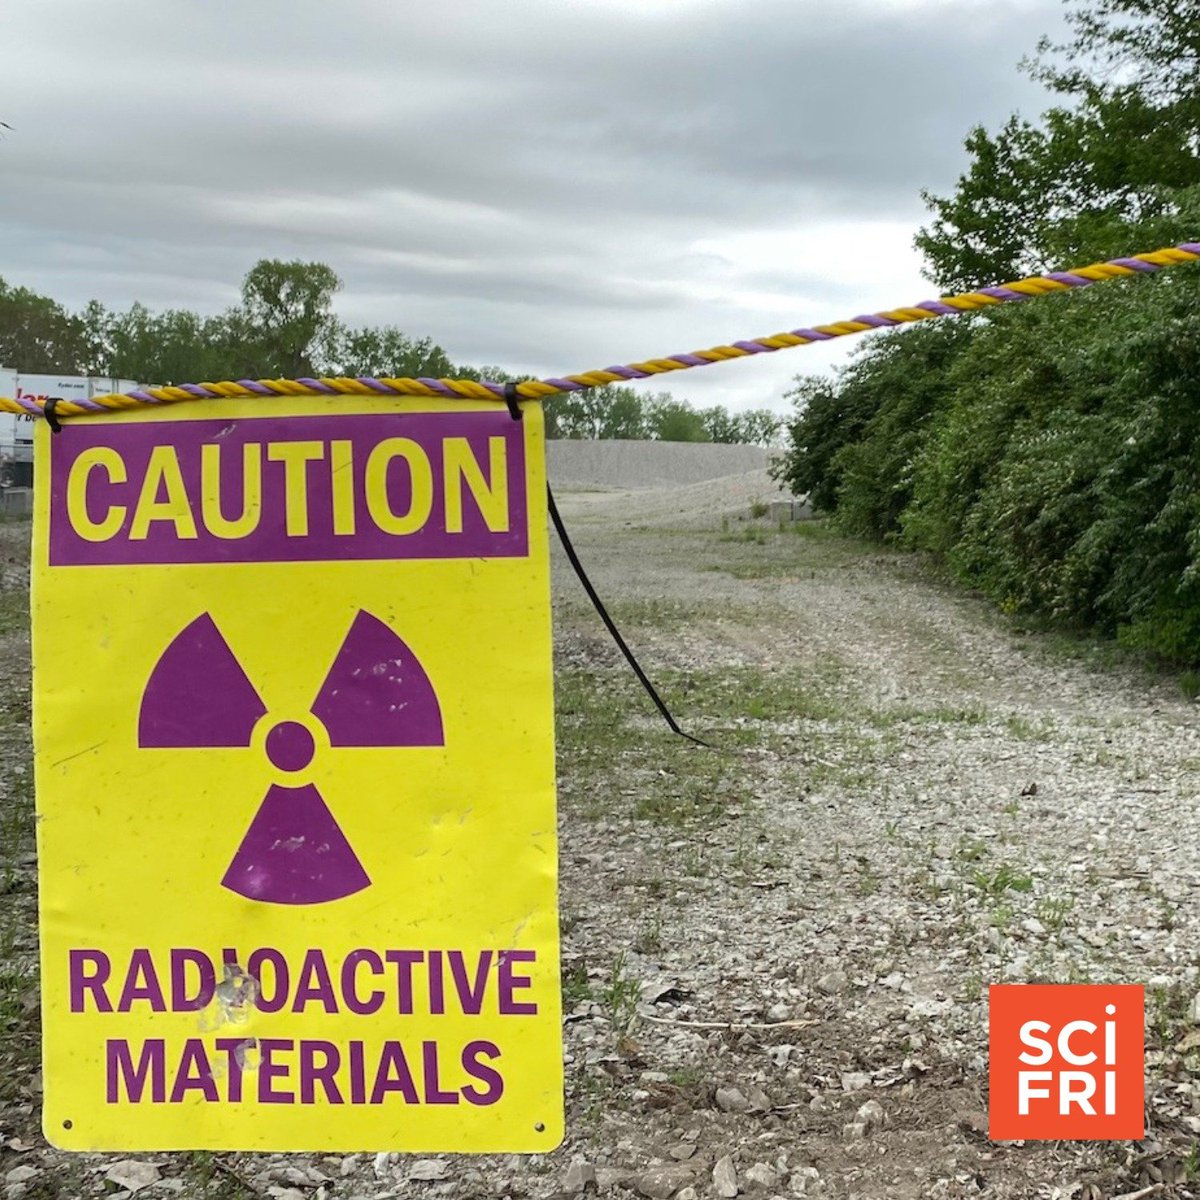 What happens when a superfund site is on a floodplain? 

In today’s episode, we explore what might happen to the many toxic sites threatened by flooding due to climate change. 

Listen here 🎧: pod.link/73329284